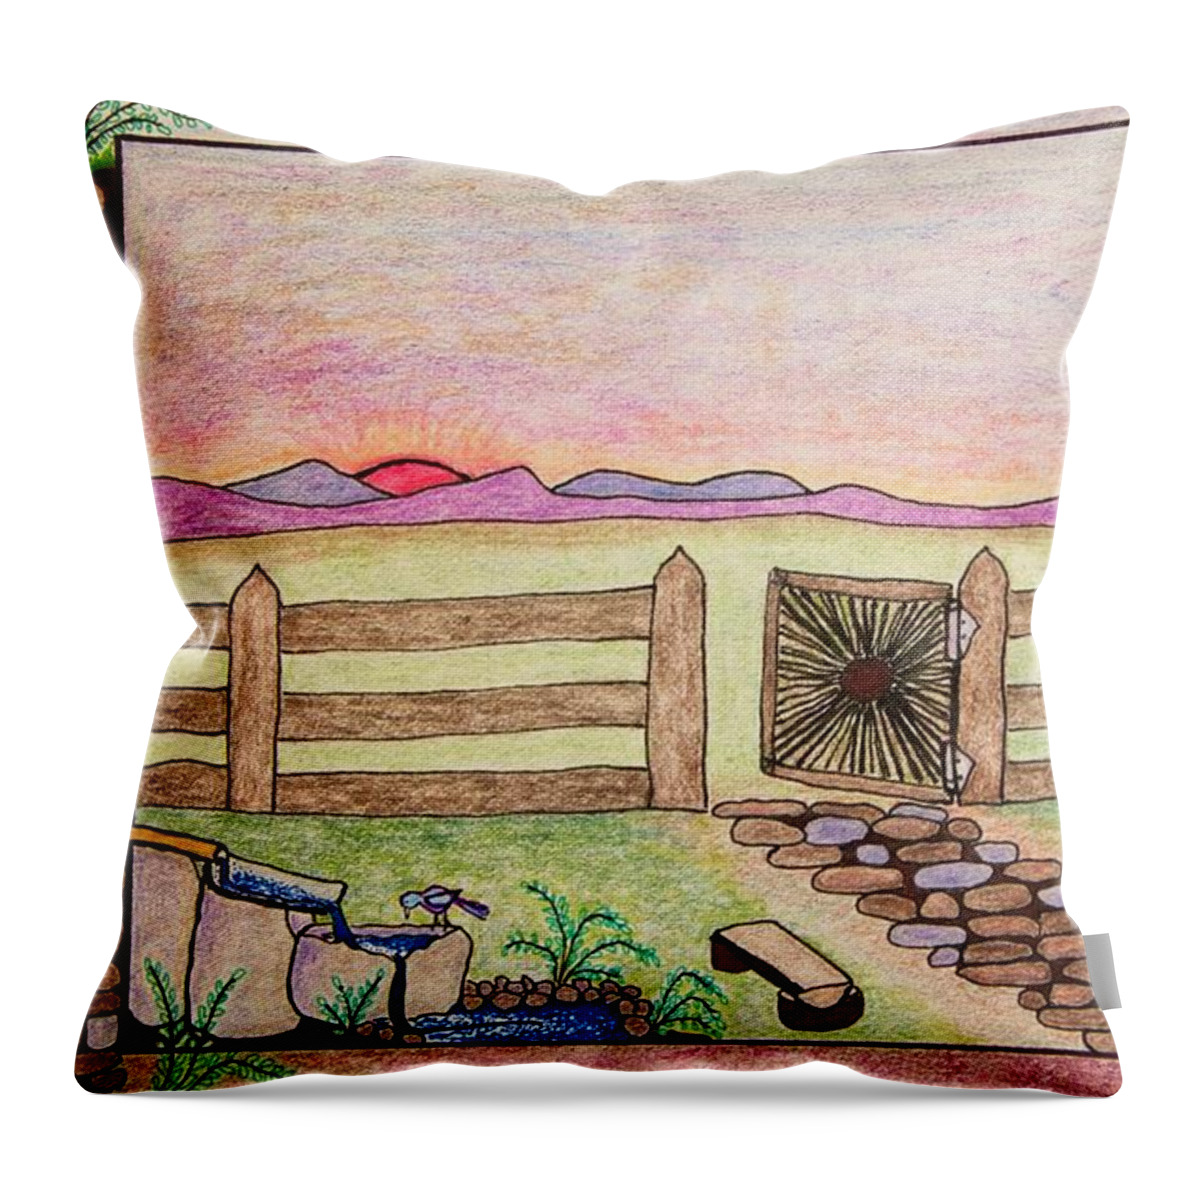 Beauty Throw Pillow featuring the drawing Beauty In Humility by Karen Nice-Webb